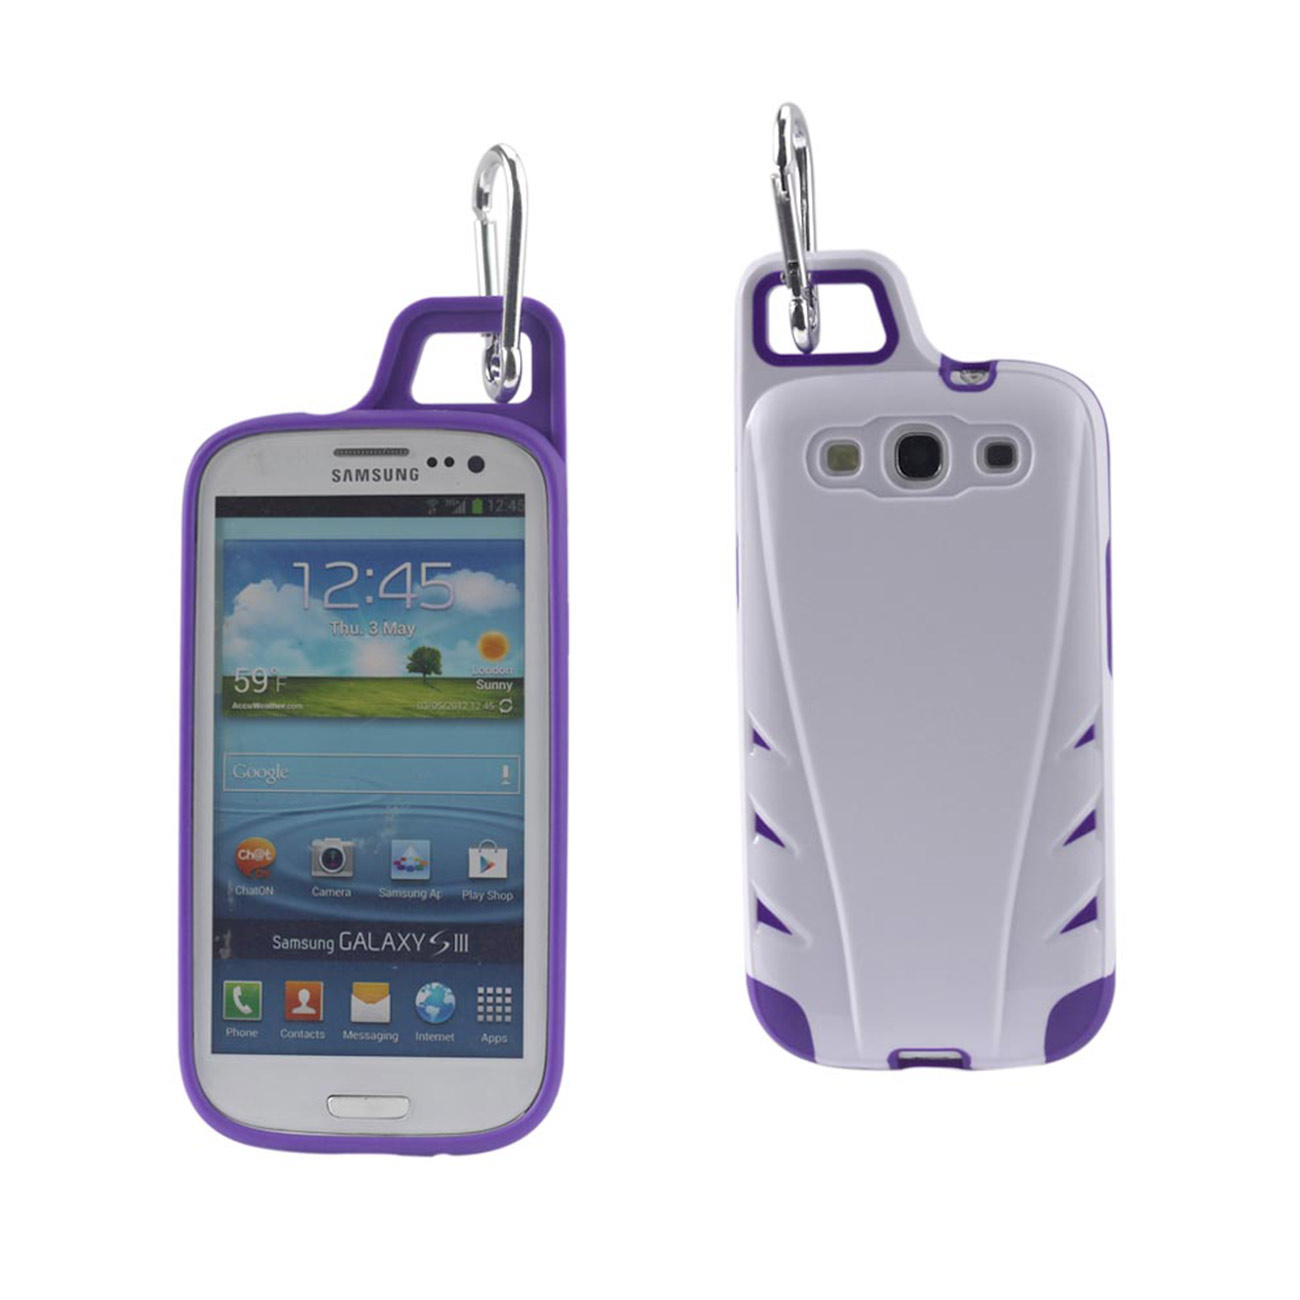 Samsung Shockproof Phone Case Galaxy S3 Dropproof Workout Hybrid Case With Hook White Purple -